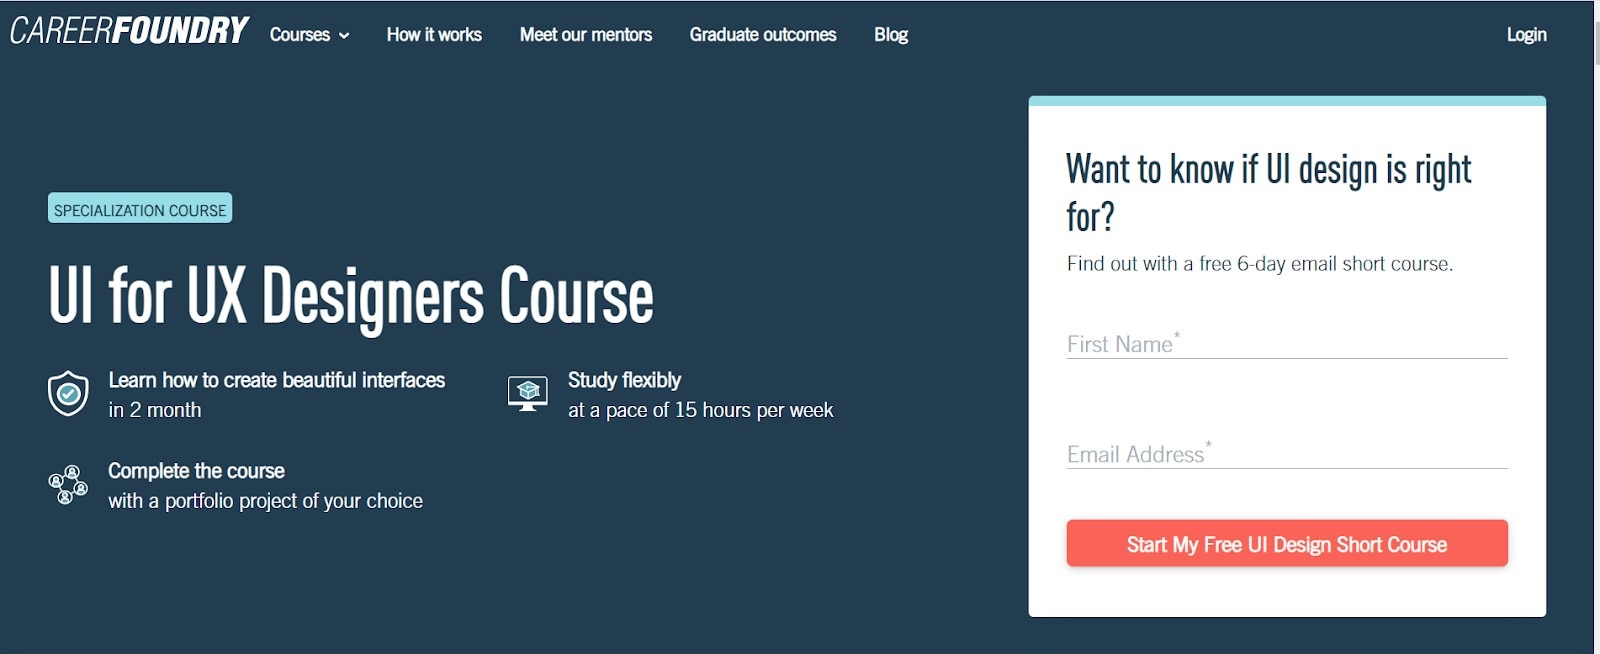 careerfoundry ux design course